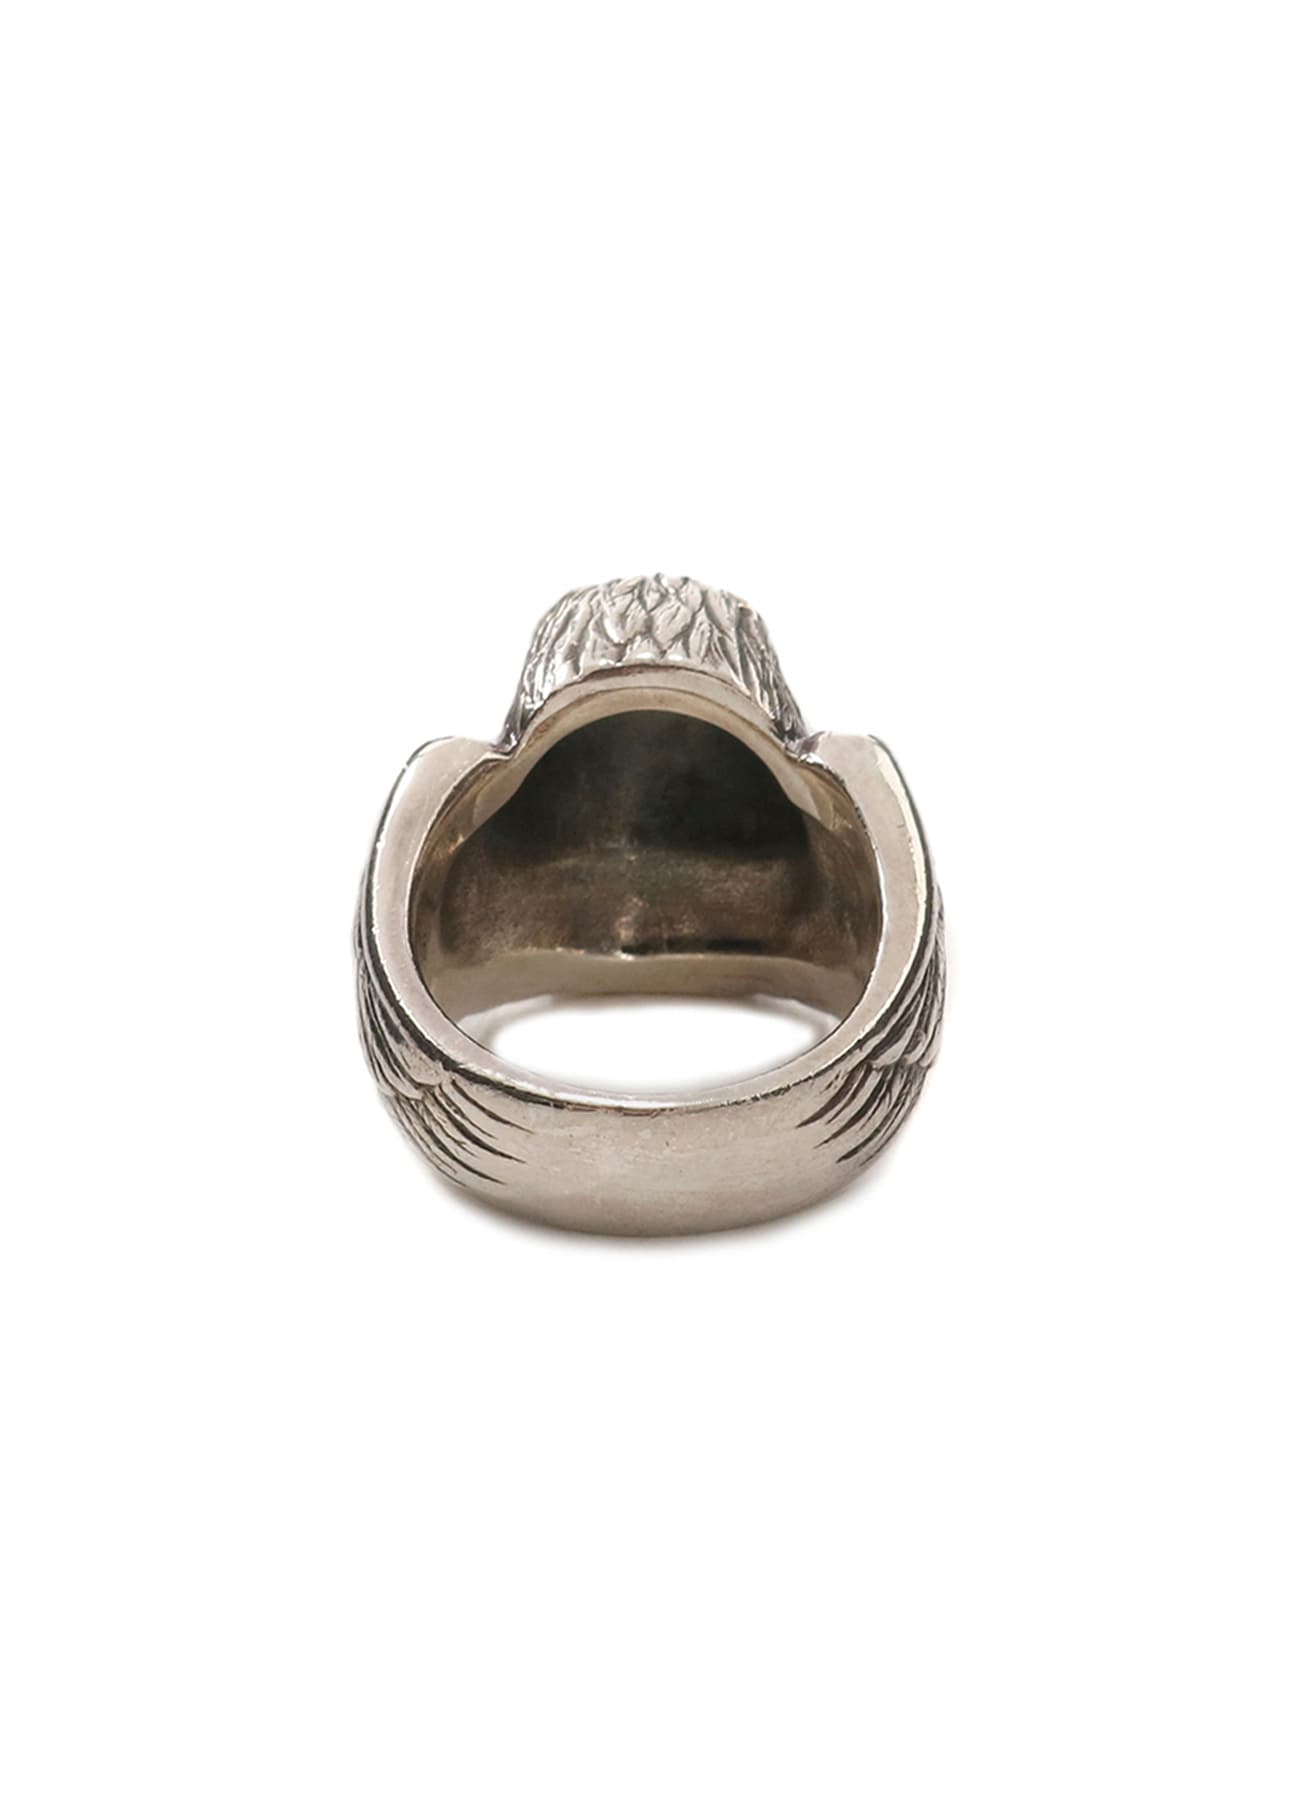 SILVER 950 EAGLE RING